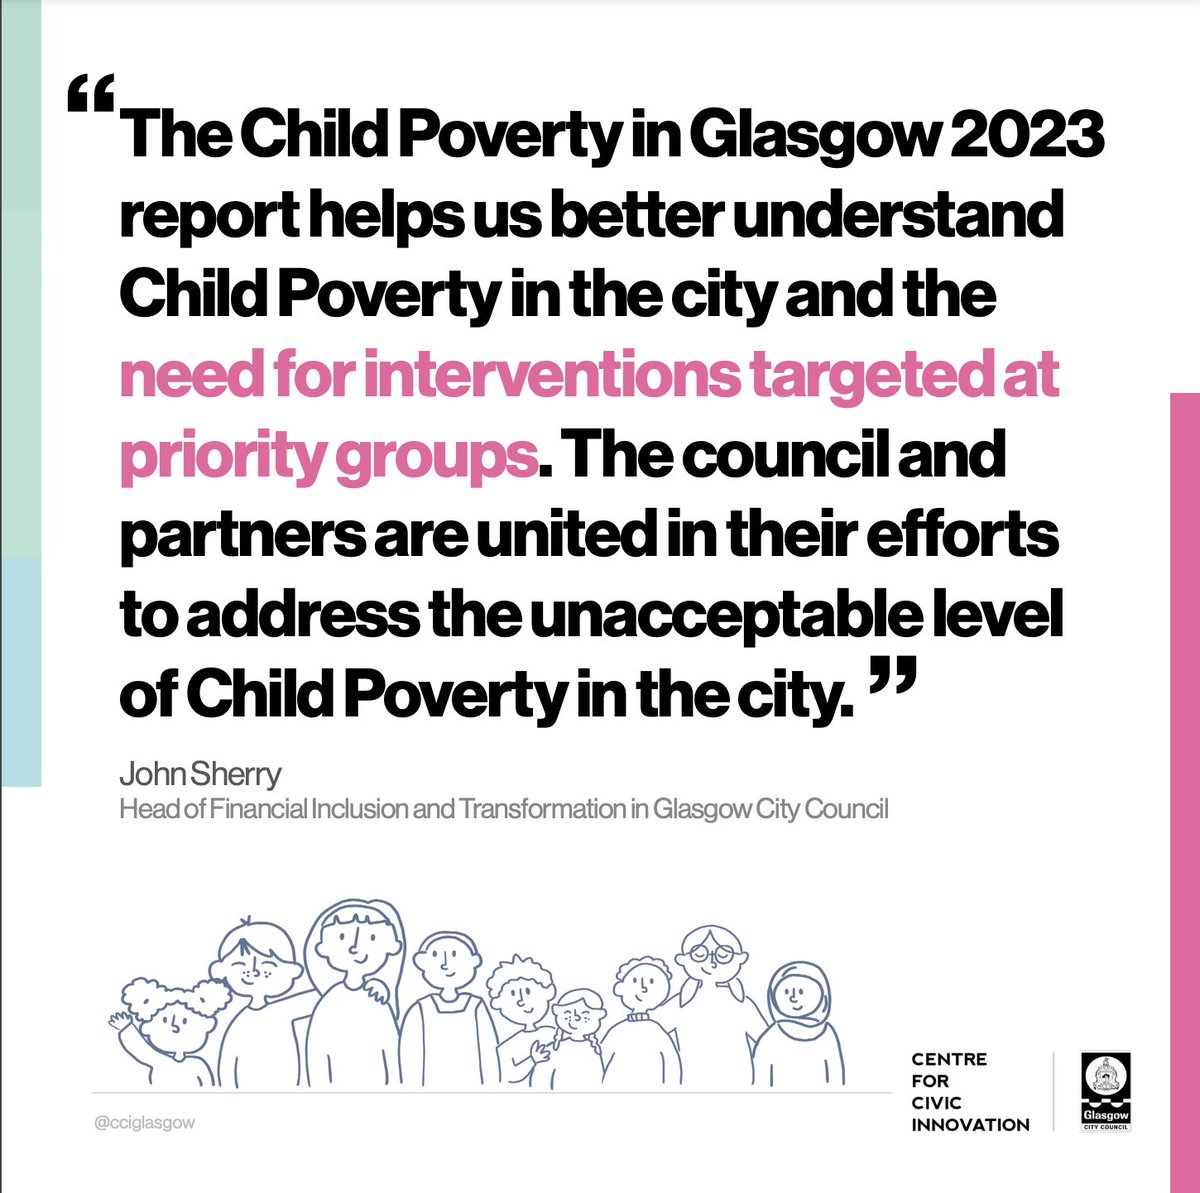 Our fourth Child Poverty report is now available to view!

This year we’ve worked with the Financial Inclusion and Transformation team to look at families who span multiple priority groups. 

VIEW HERE:
cciglasgow.org/projects/child…

@PovertyAlliance #ChallengePoverty